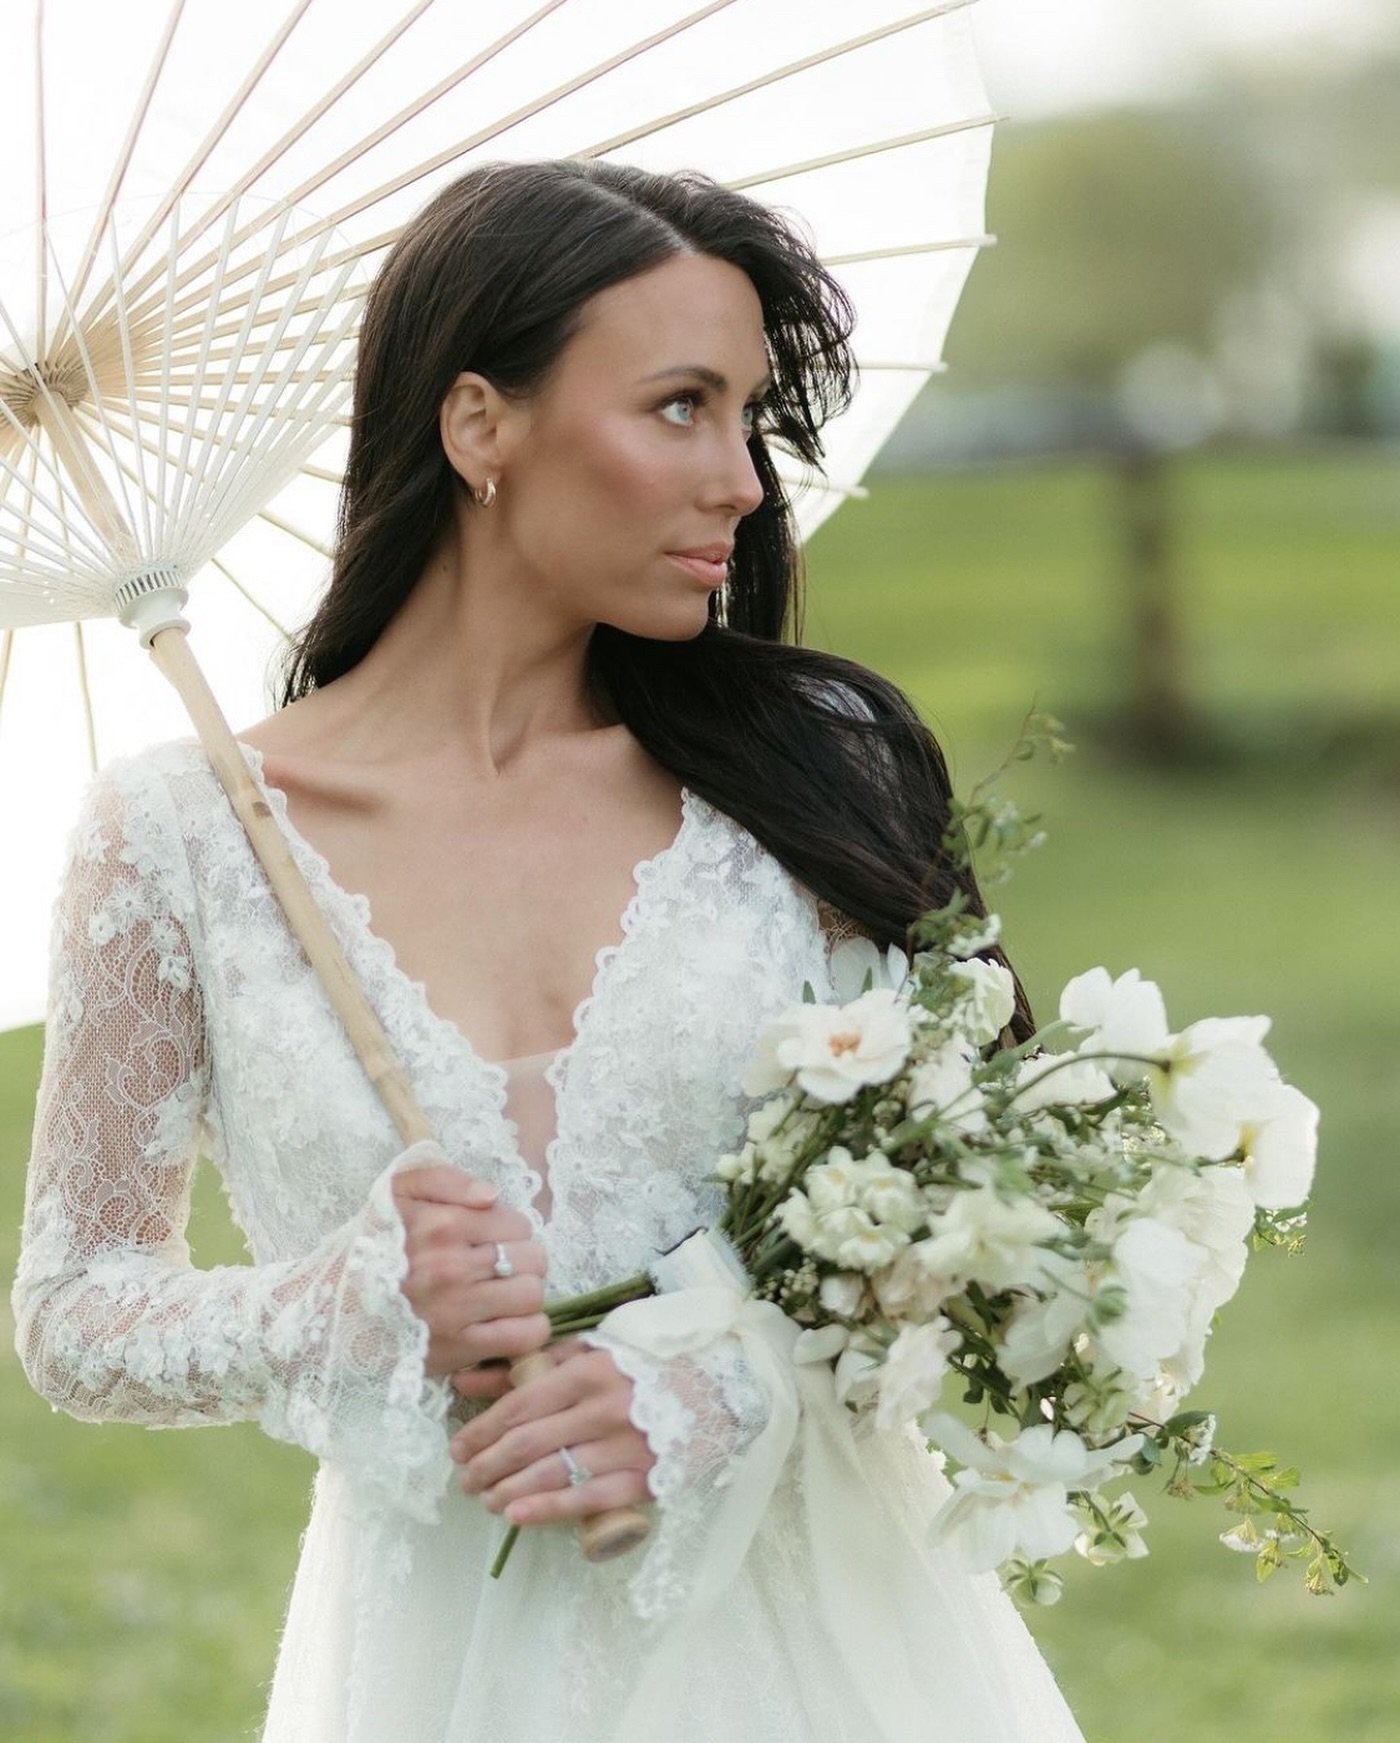 Who knew a lacy bell sleeve, a parasol, and wind swept hair would be giving so much romance. 🤍
&bull;&bull;&bull;
📸- @lottieshepherdphoto
Dress &ldquo;Leslie&rdquo; by @lissimonbridal